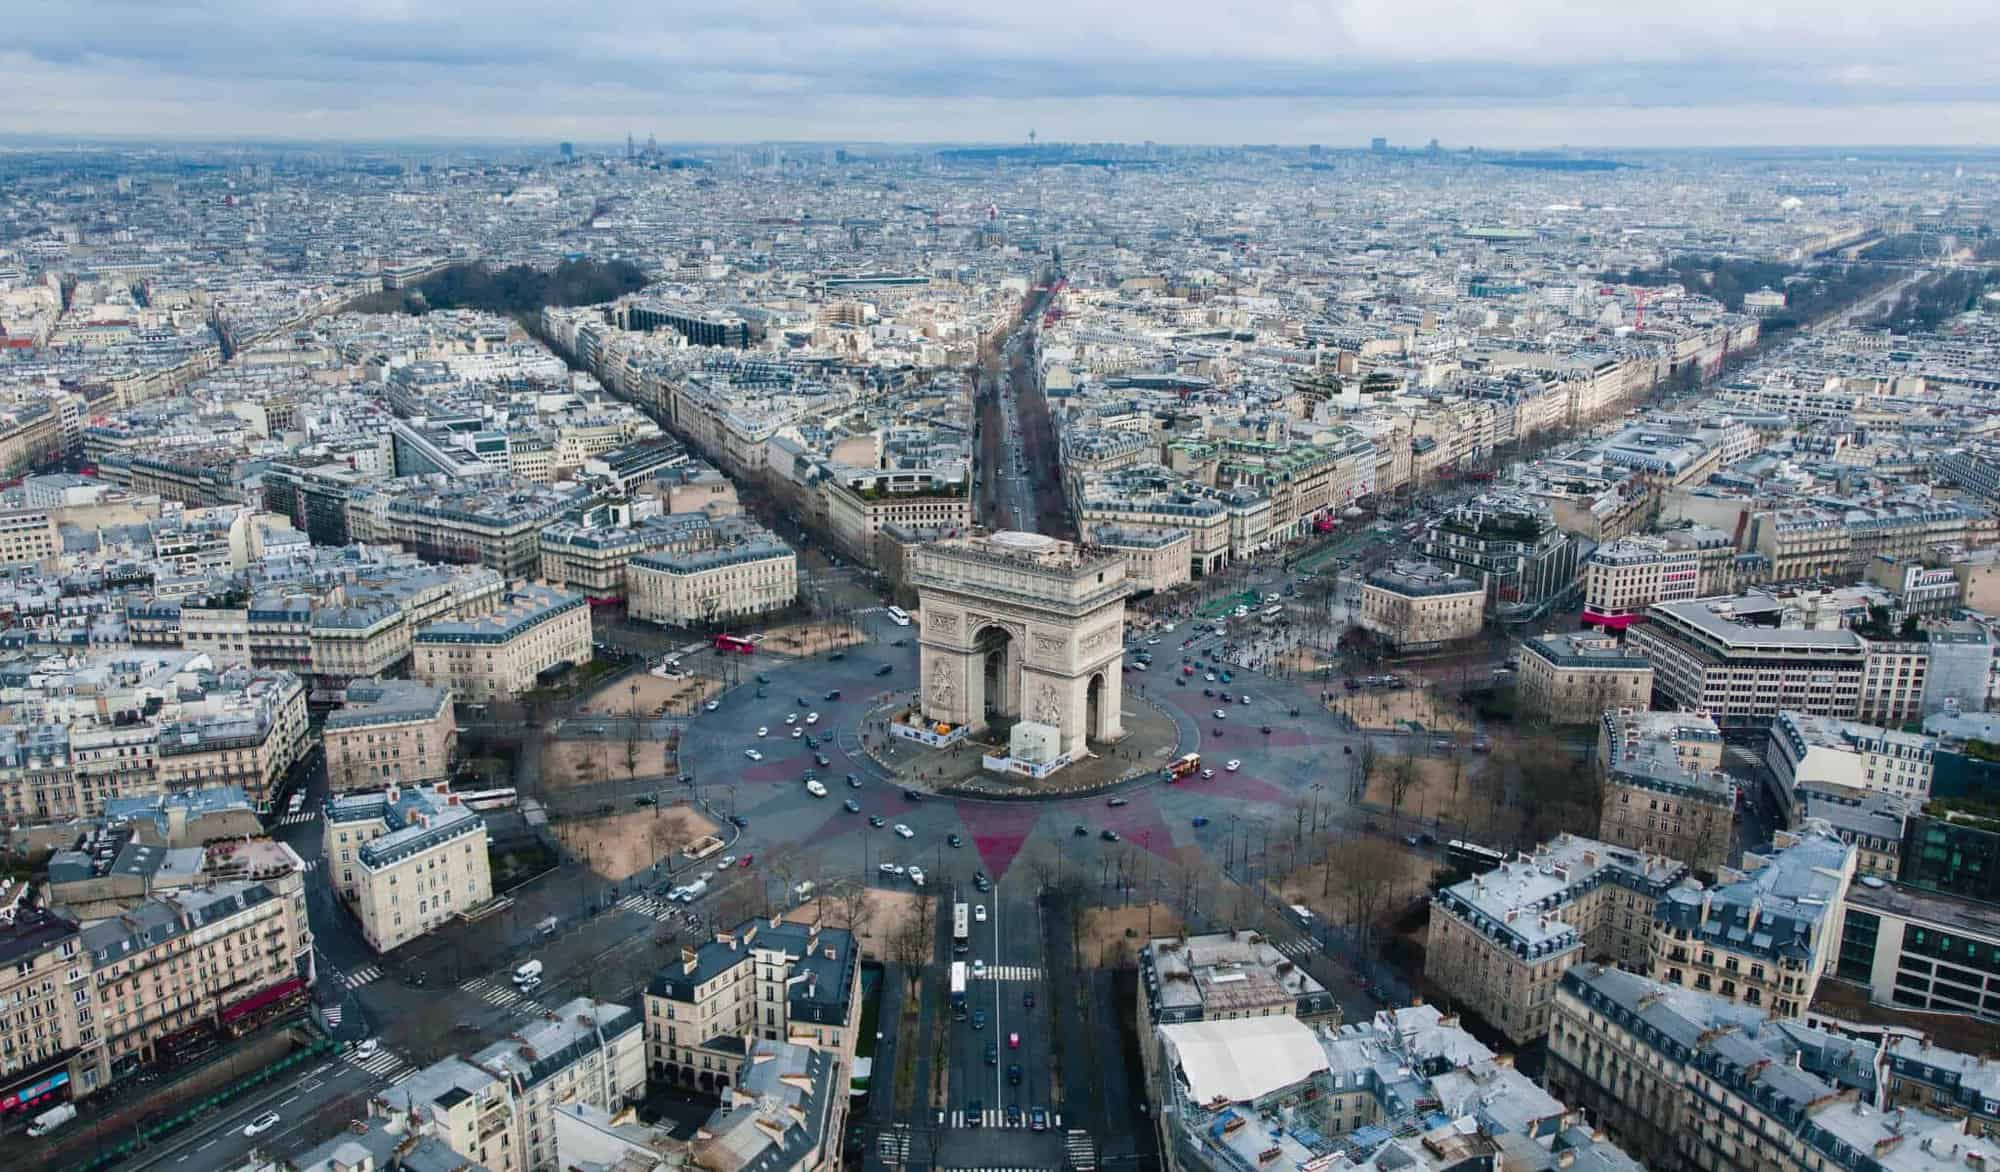 An aerial view of the Arc de Triomphe in Paris on a gloomy day.